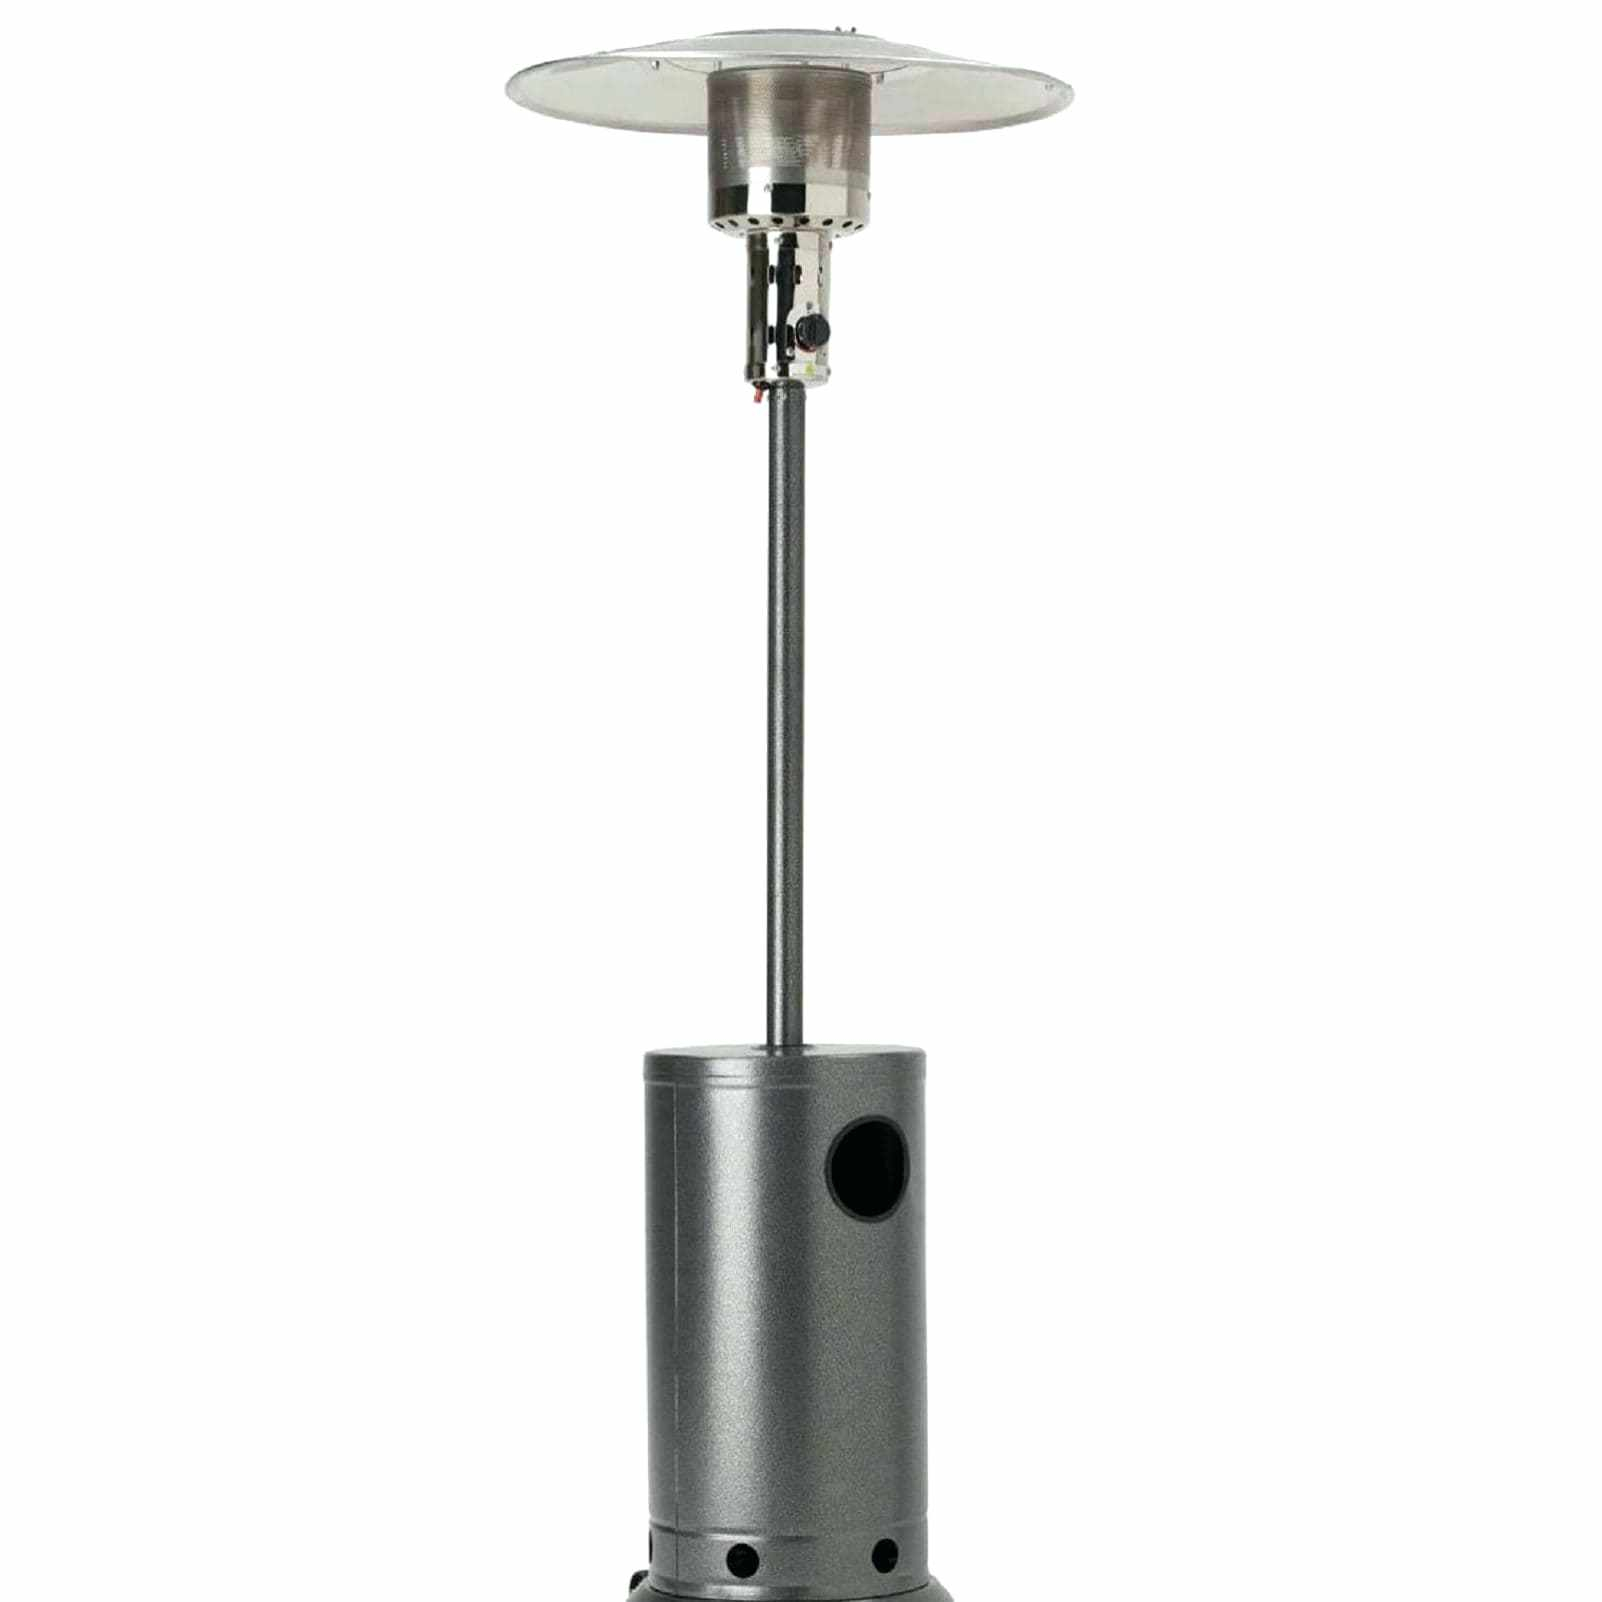 Classic Flame Patio Heater Gas Heaters Small Calor Uk within sizing 1602 X 1602